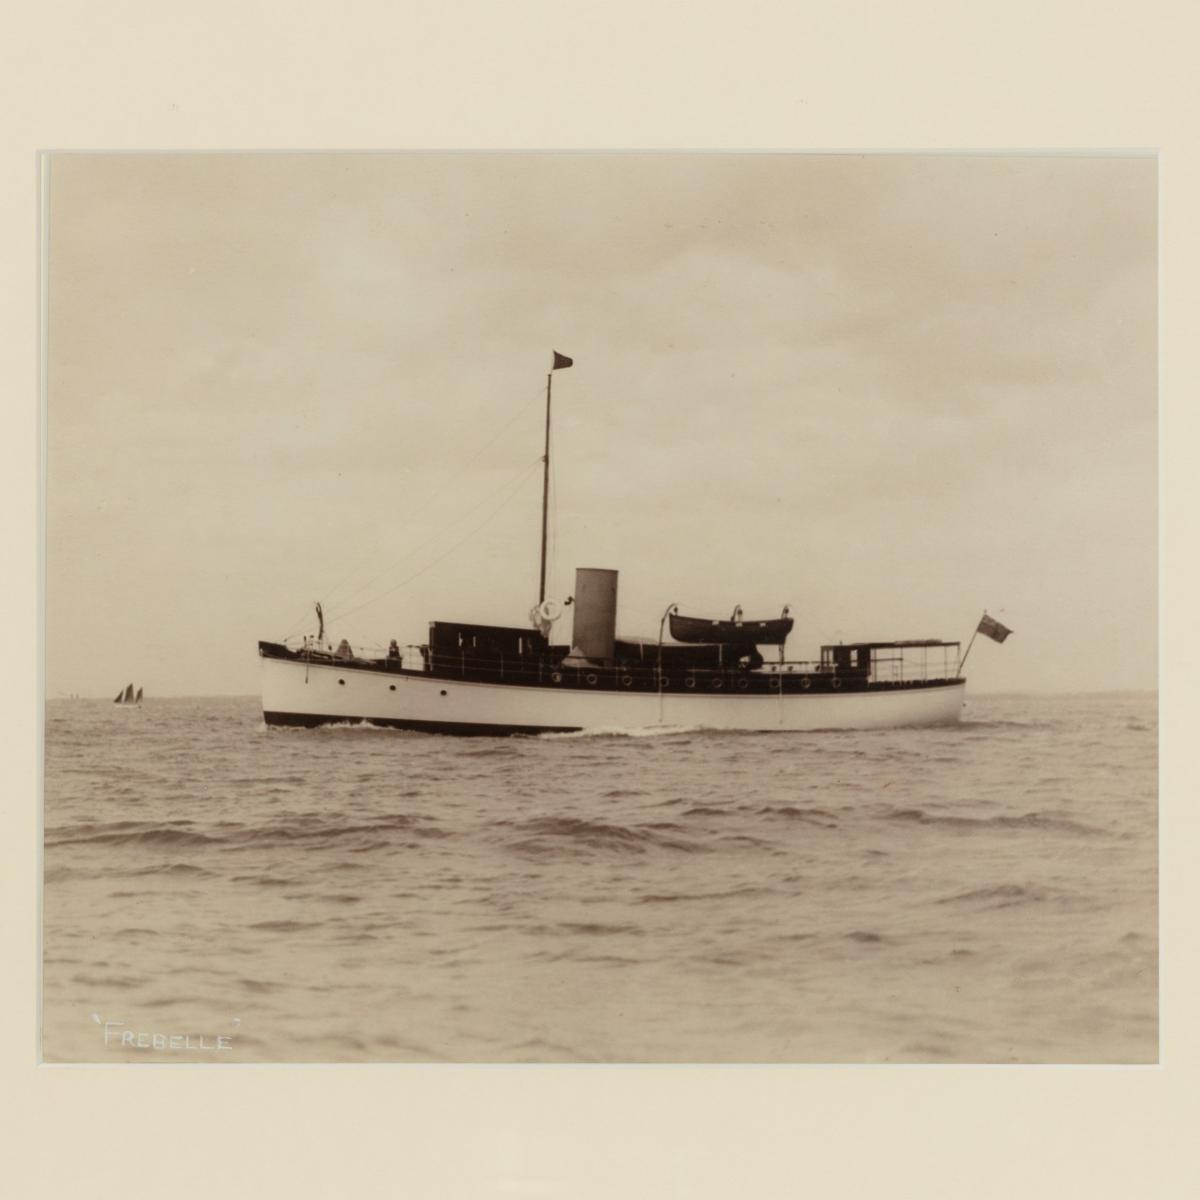 Early silver gelatin photographic print of the Gentleman’s yacht Frebelle